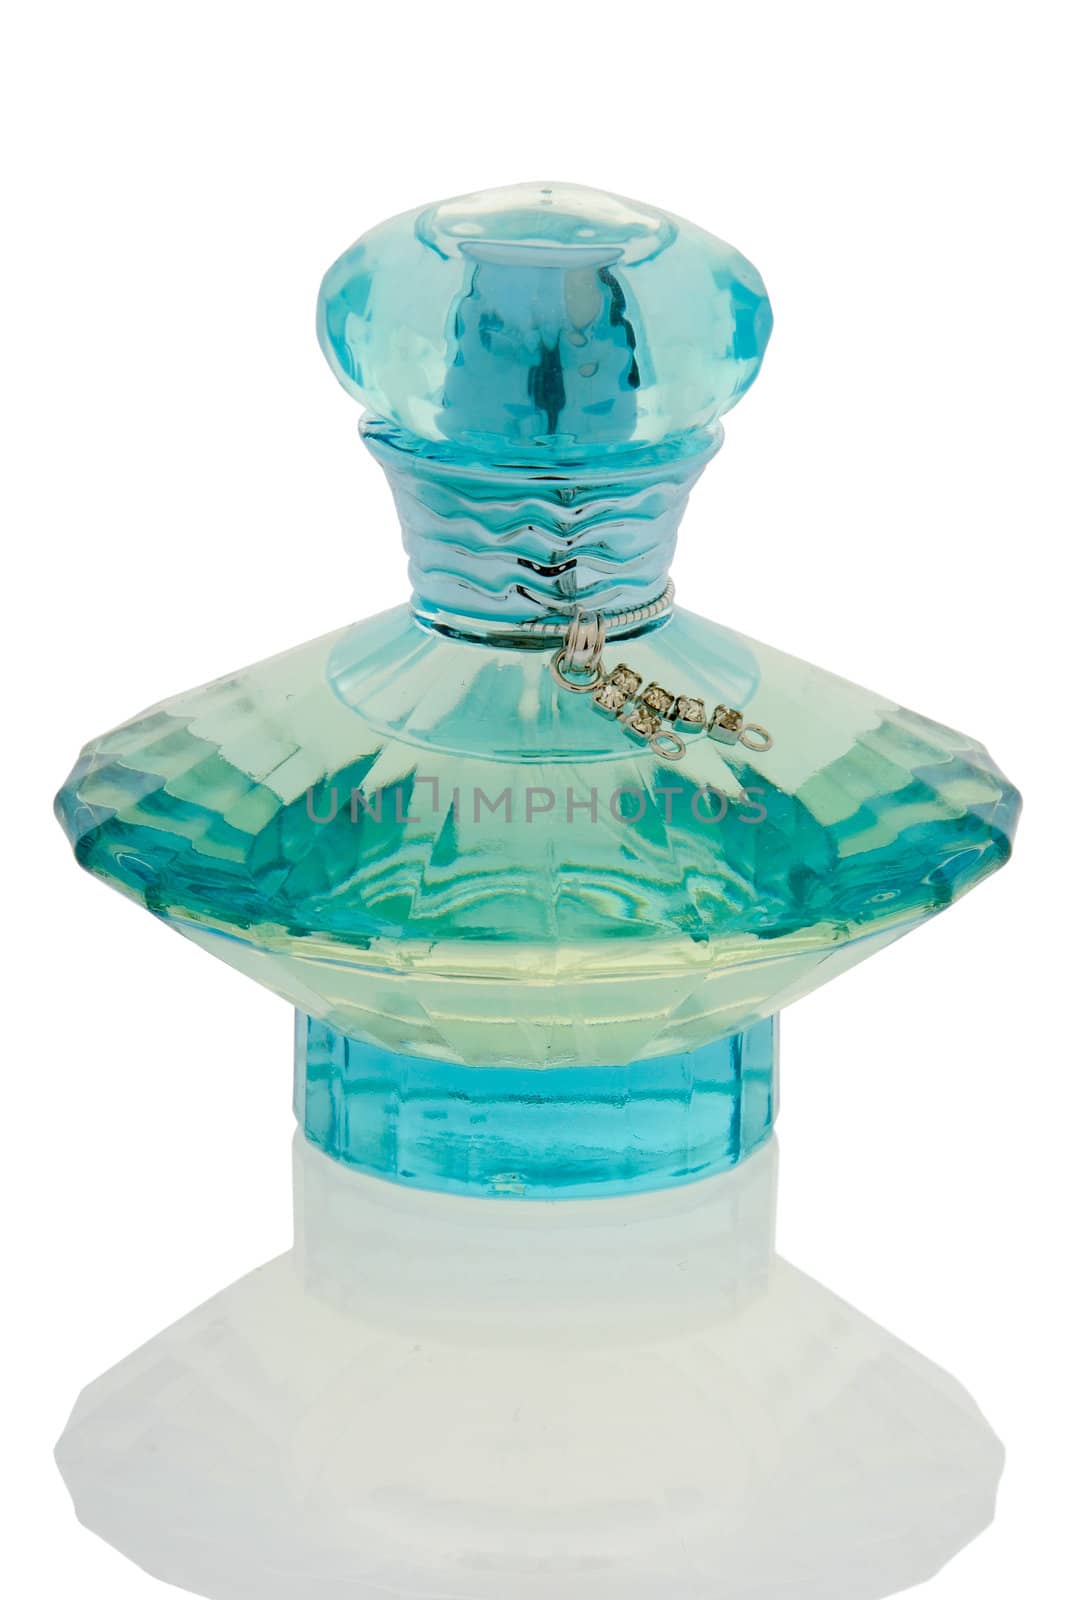 Perfume bottle and reflection on a clean white background